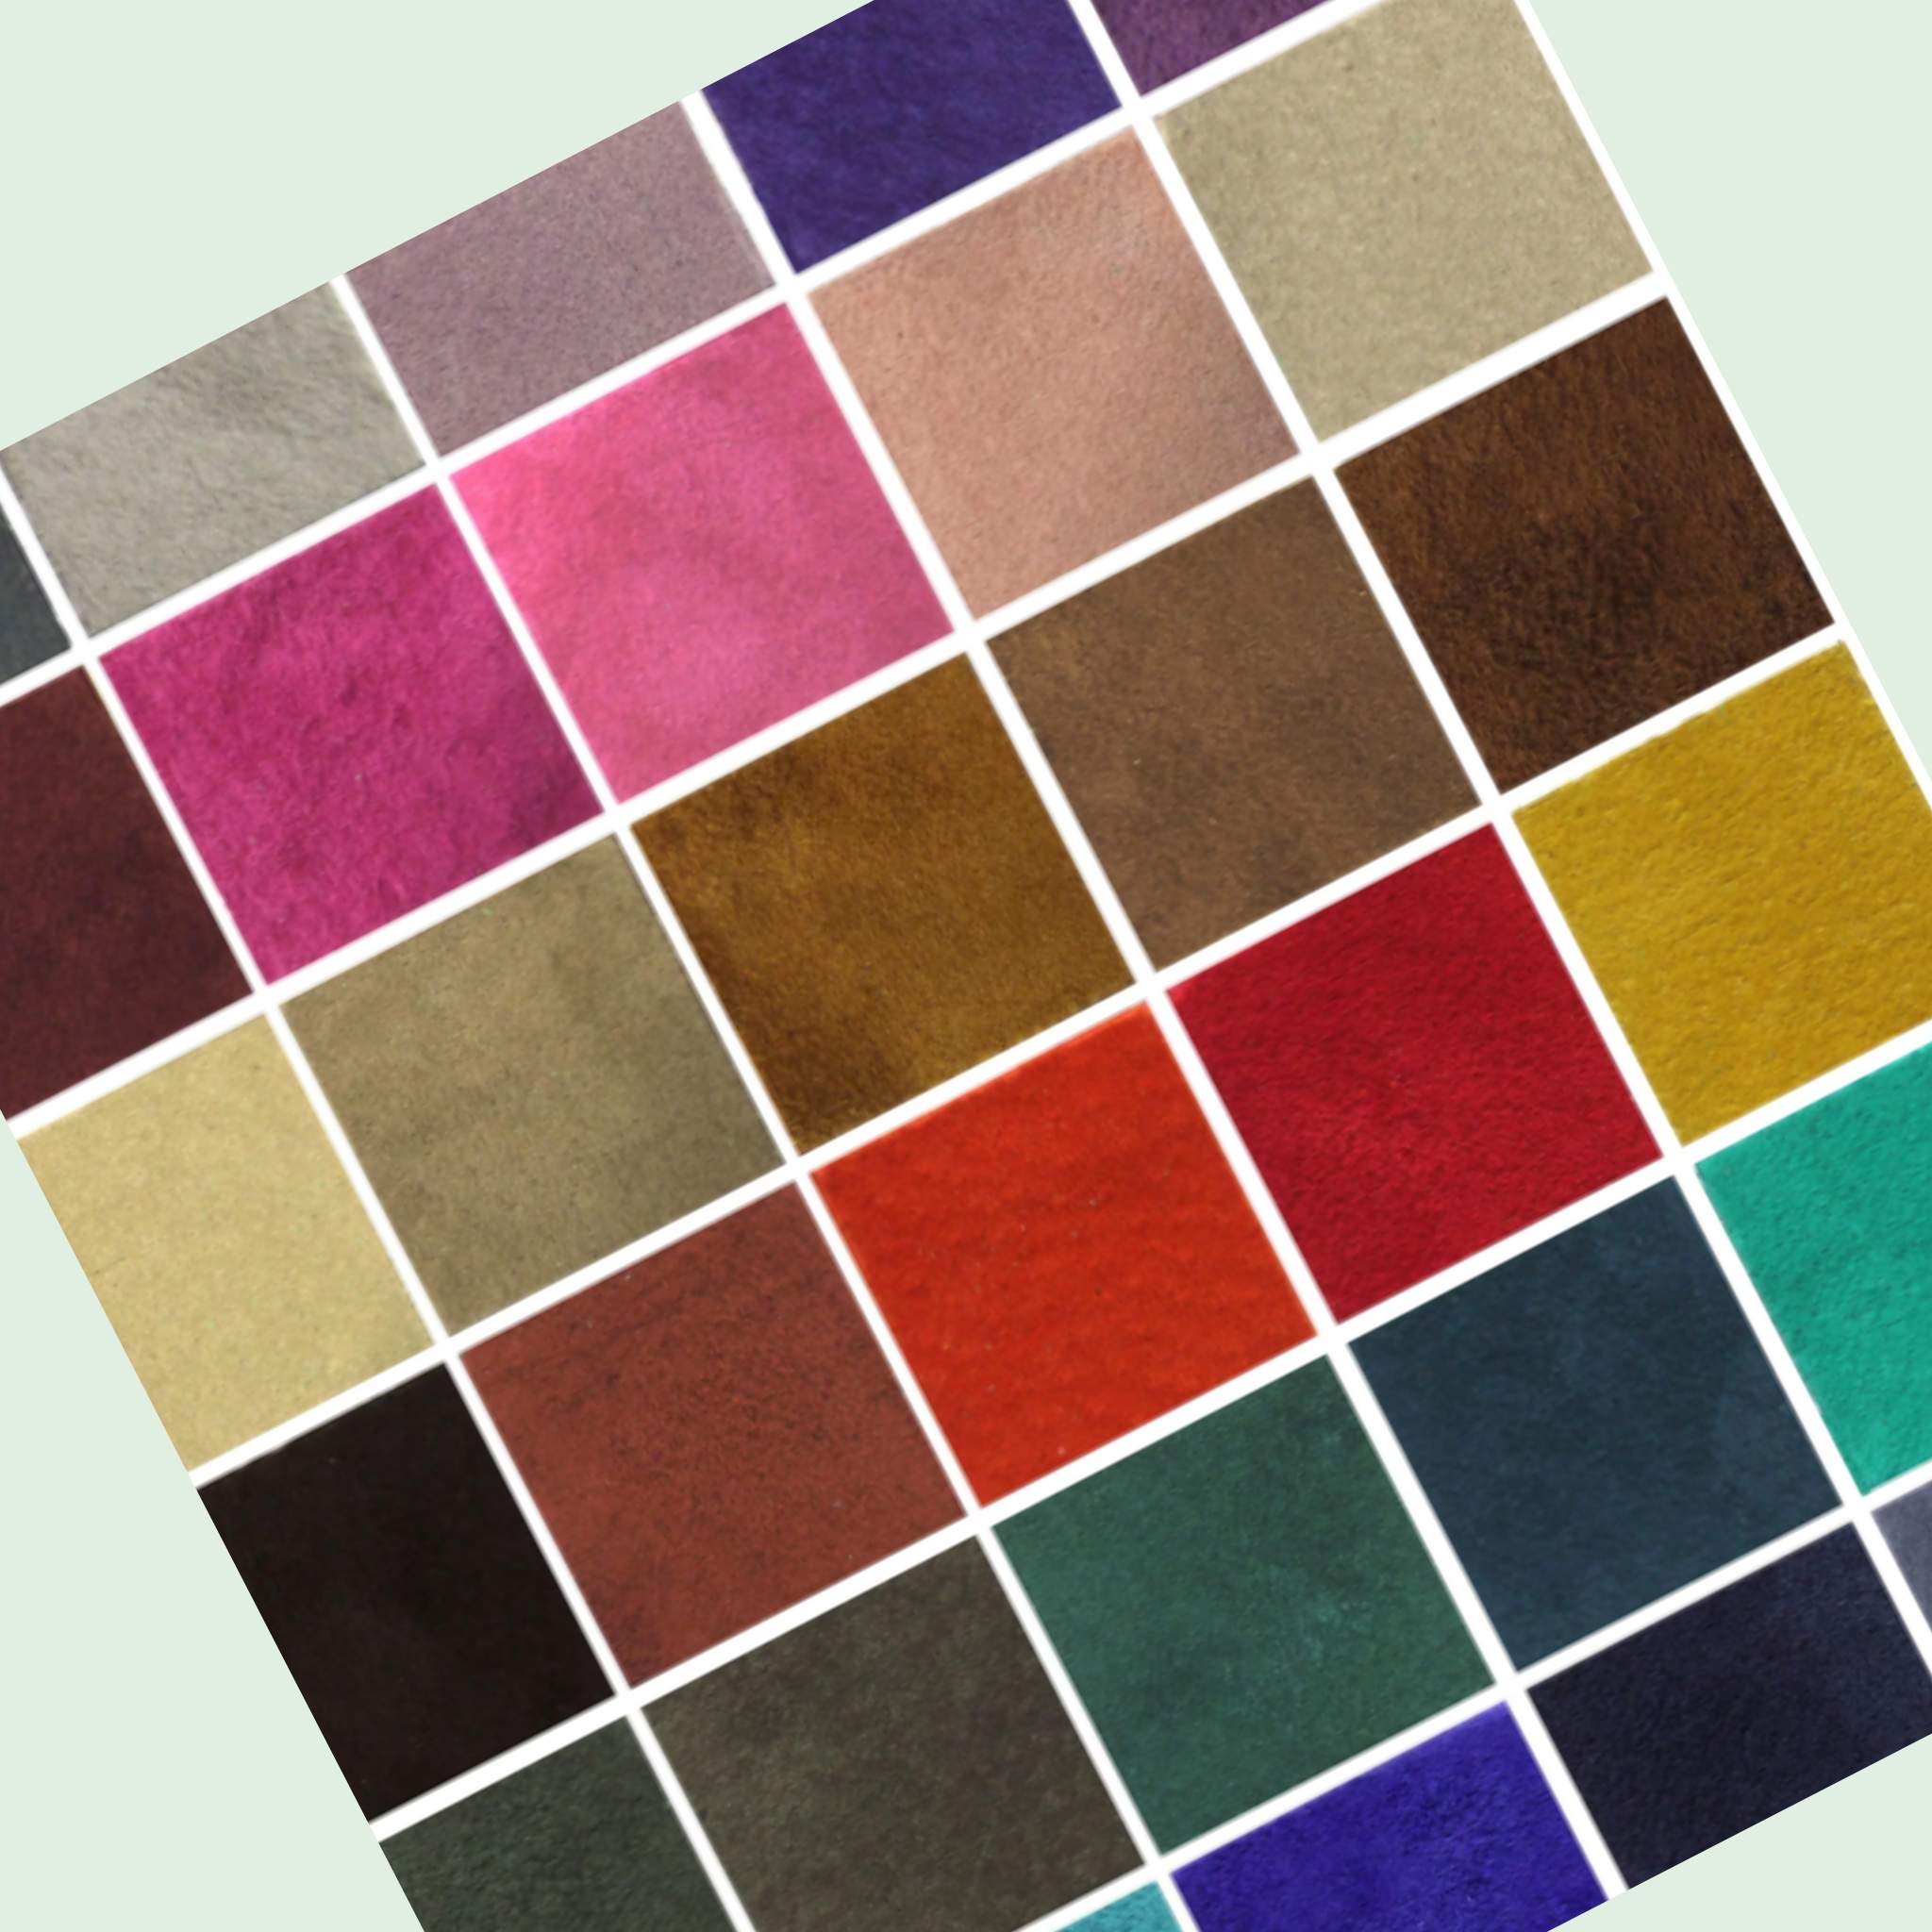 Colour reference sample card - a lightweight versatile suede that is suitable for hand or machine stitching.